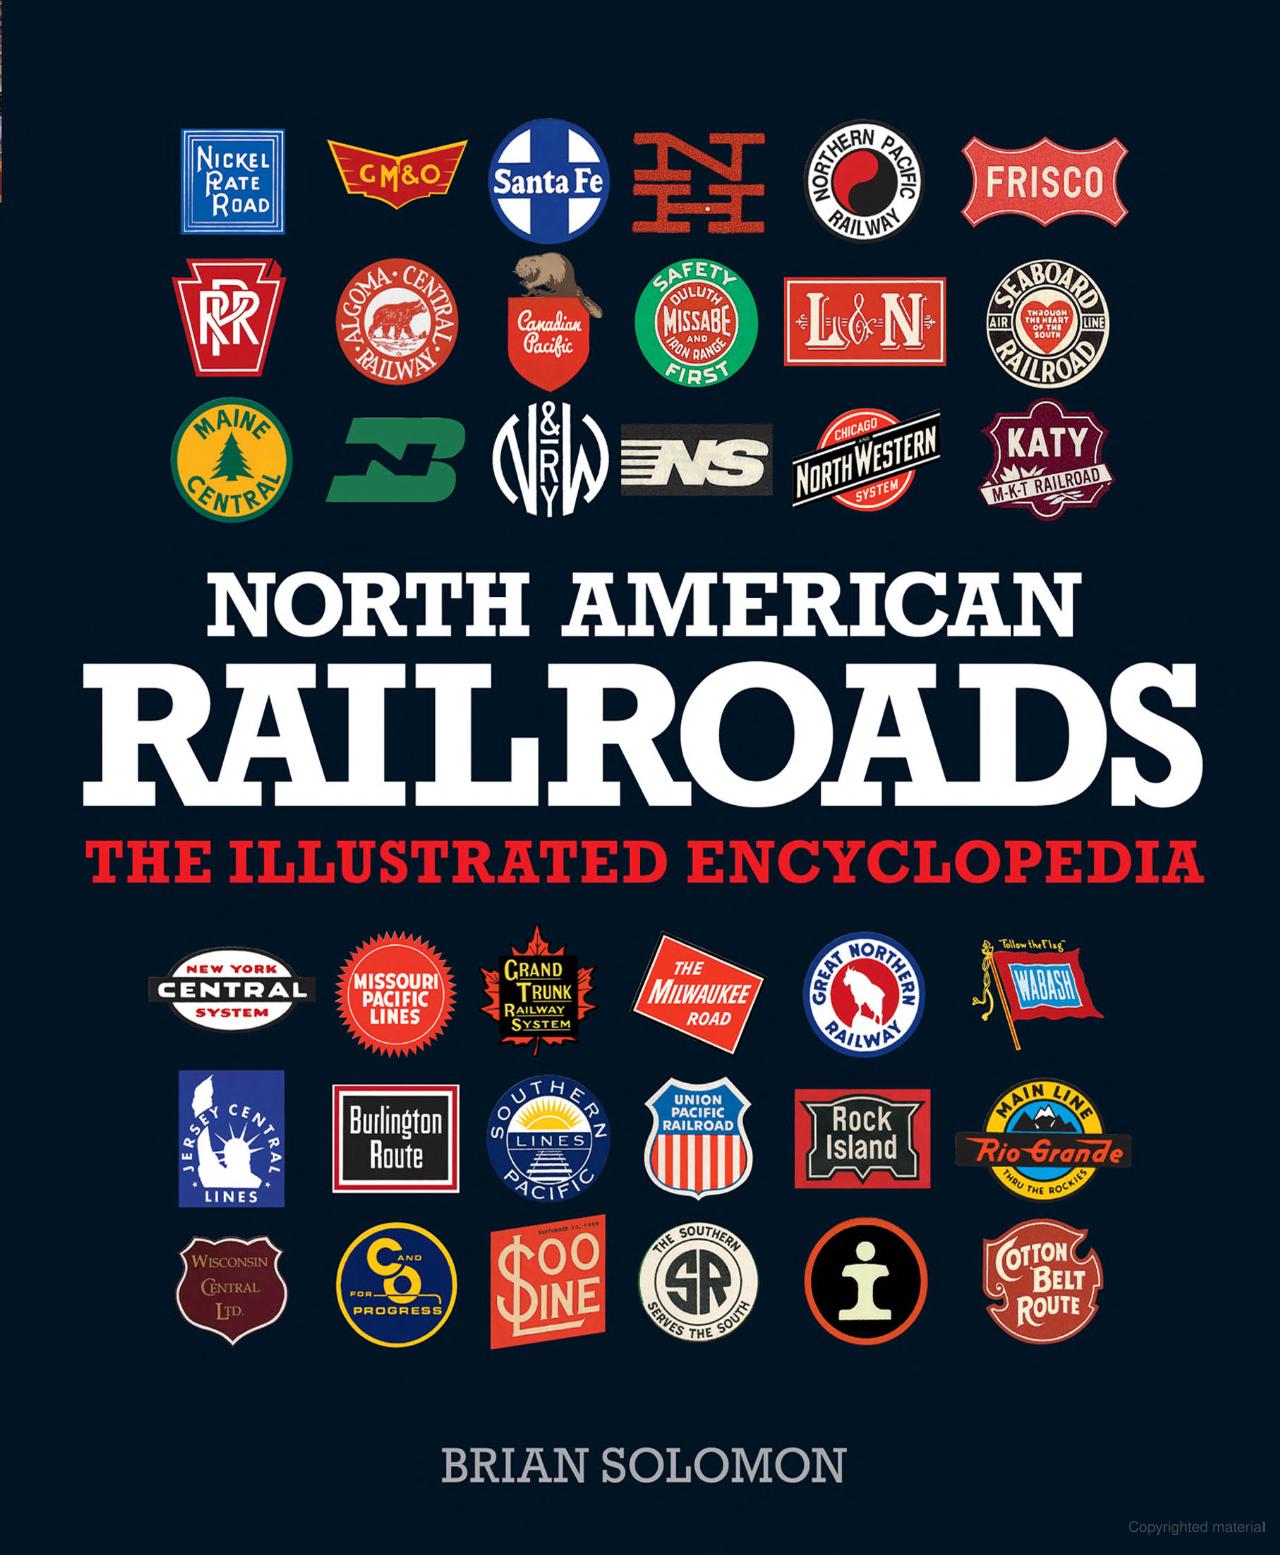 North American Railroads - The Illustrated Encyclopedia